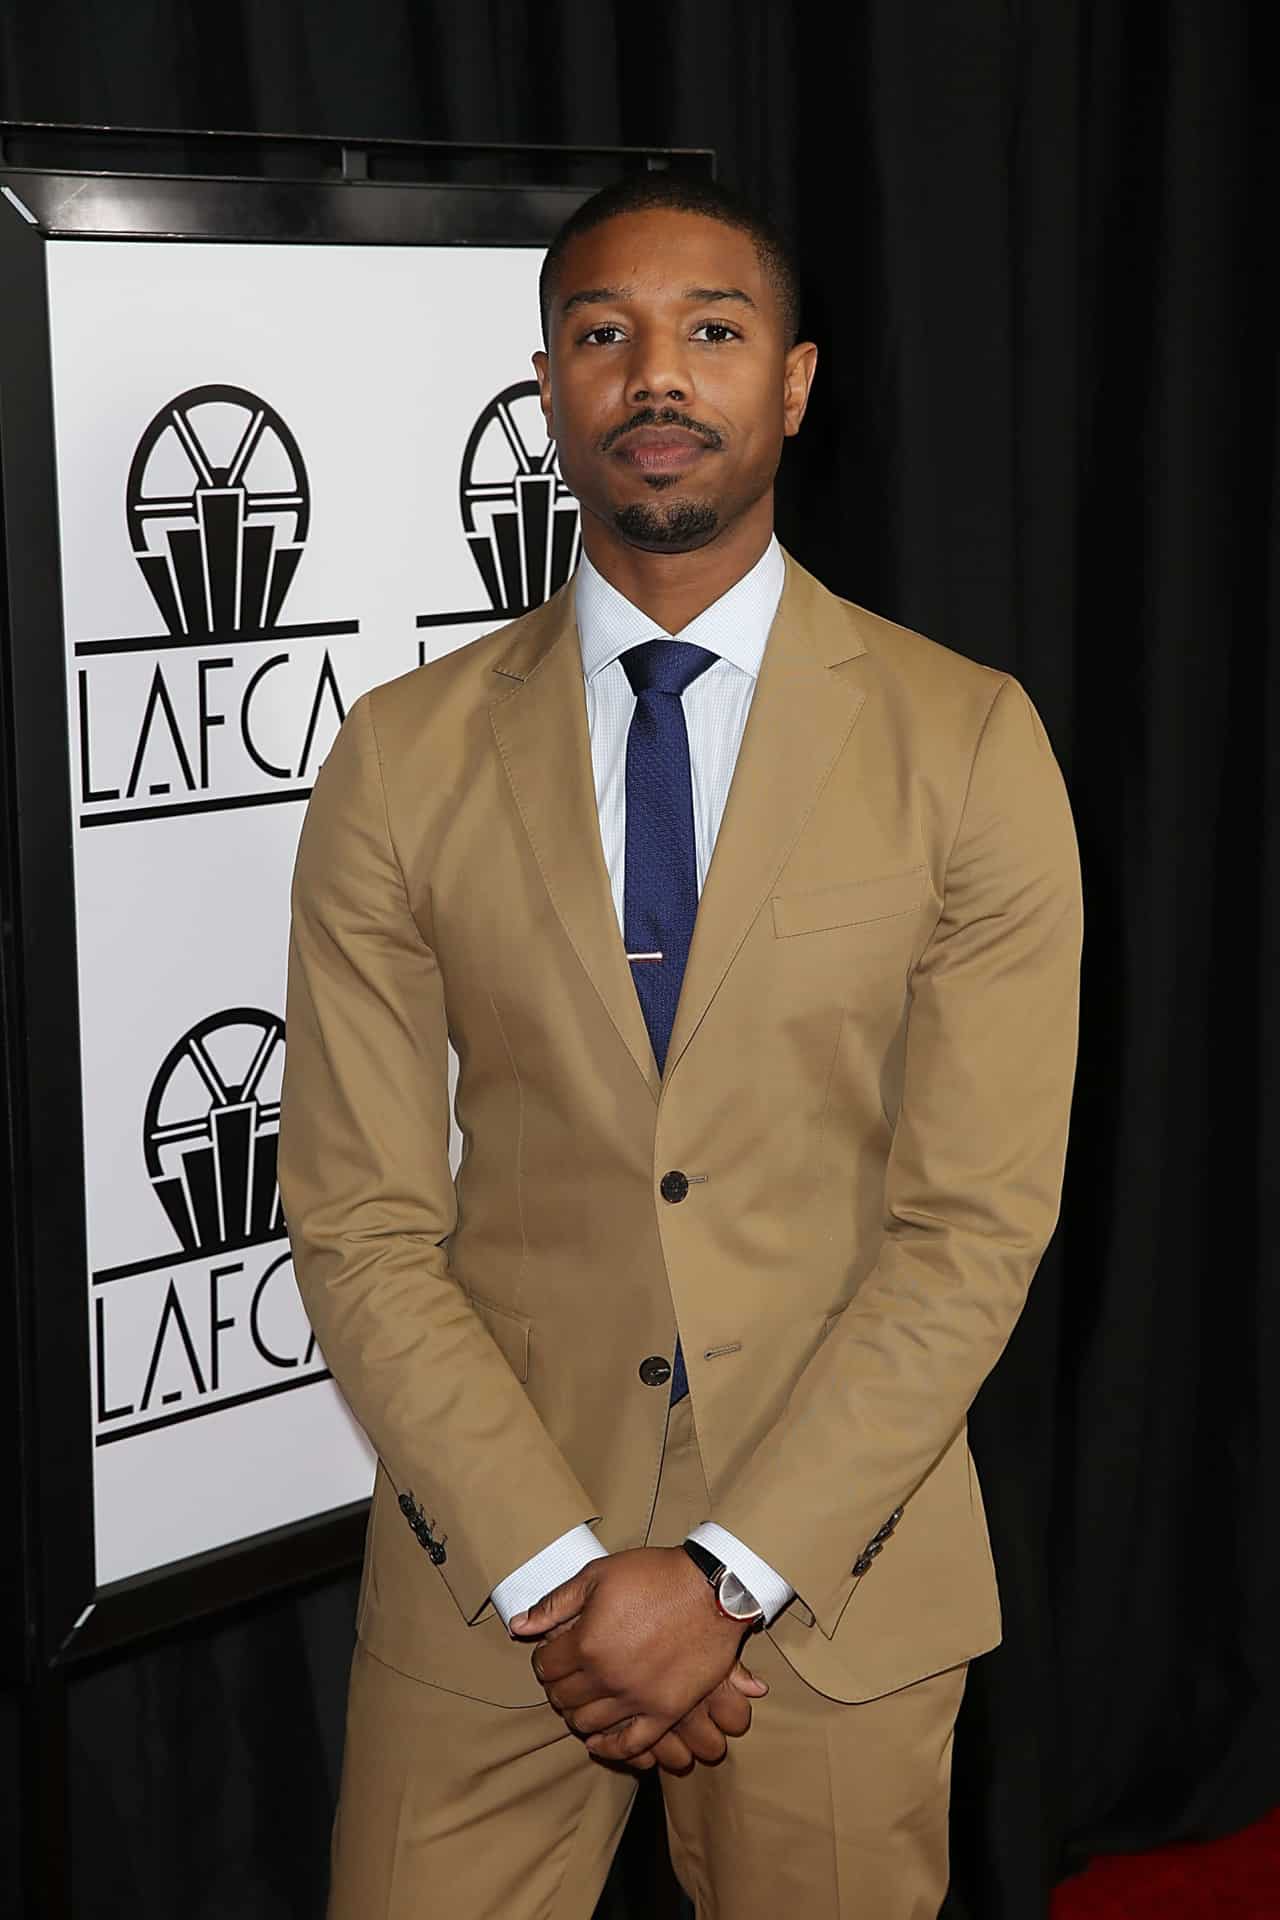 CENTURY CITY, CA - JANUARY 09:  Michael B. Jordan arrives at the 40th Annual Los Angeles Film Critics Association Awards at InterContinental Hotel on January 9, 2016 in Century City, California.  (Photo by Joe Scarnici/Getty Images)